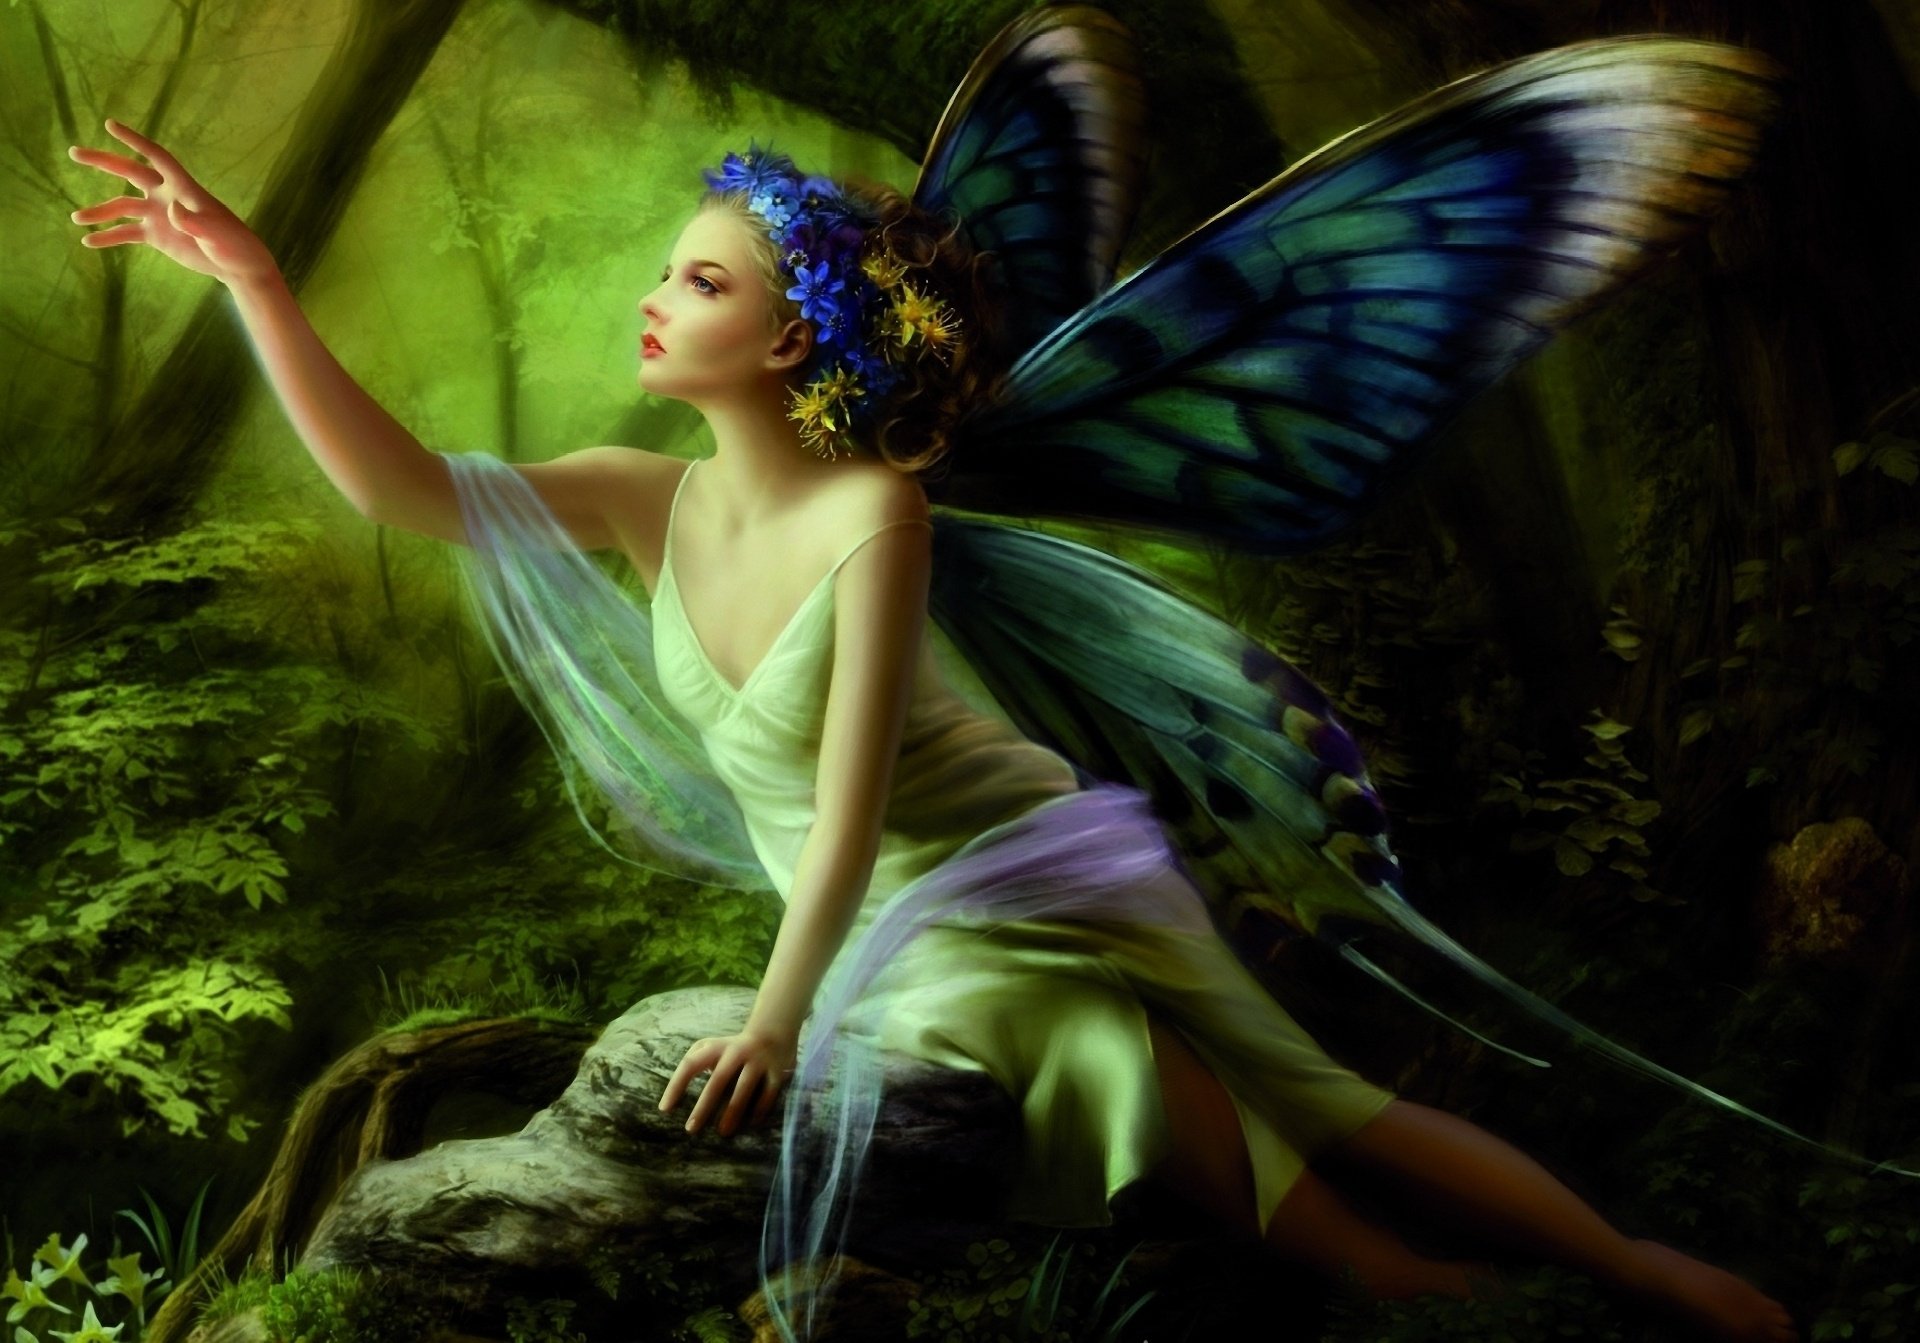 arts, Hand, Sitting, Forest, Stone, Fairy, Butterfly, Wings, Girl Wallpaper